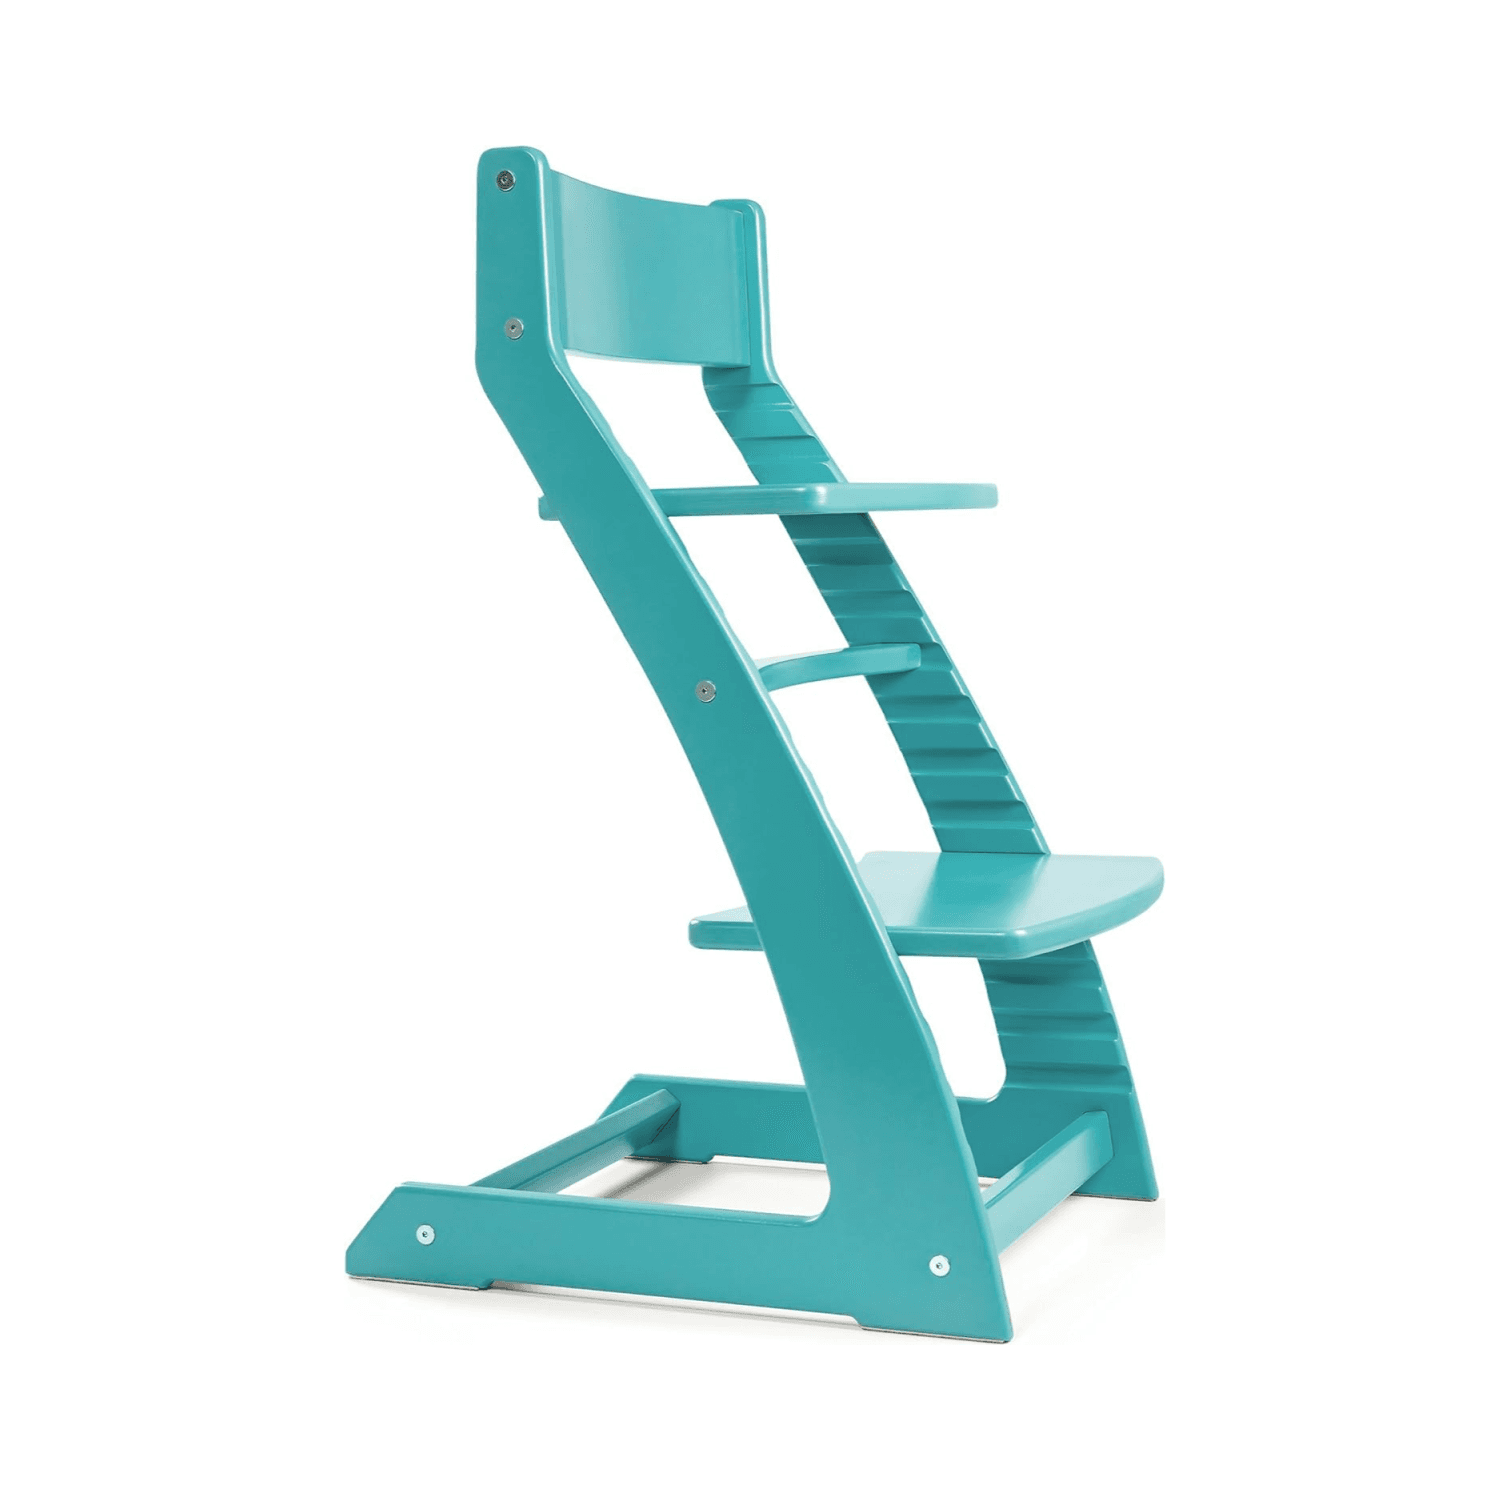 Montessori Fornel Heartwood Adjustable Wooden High Chair Turquoise